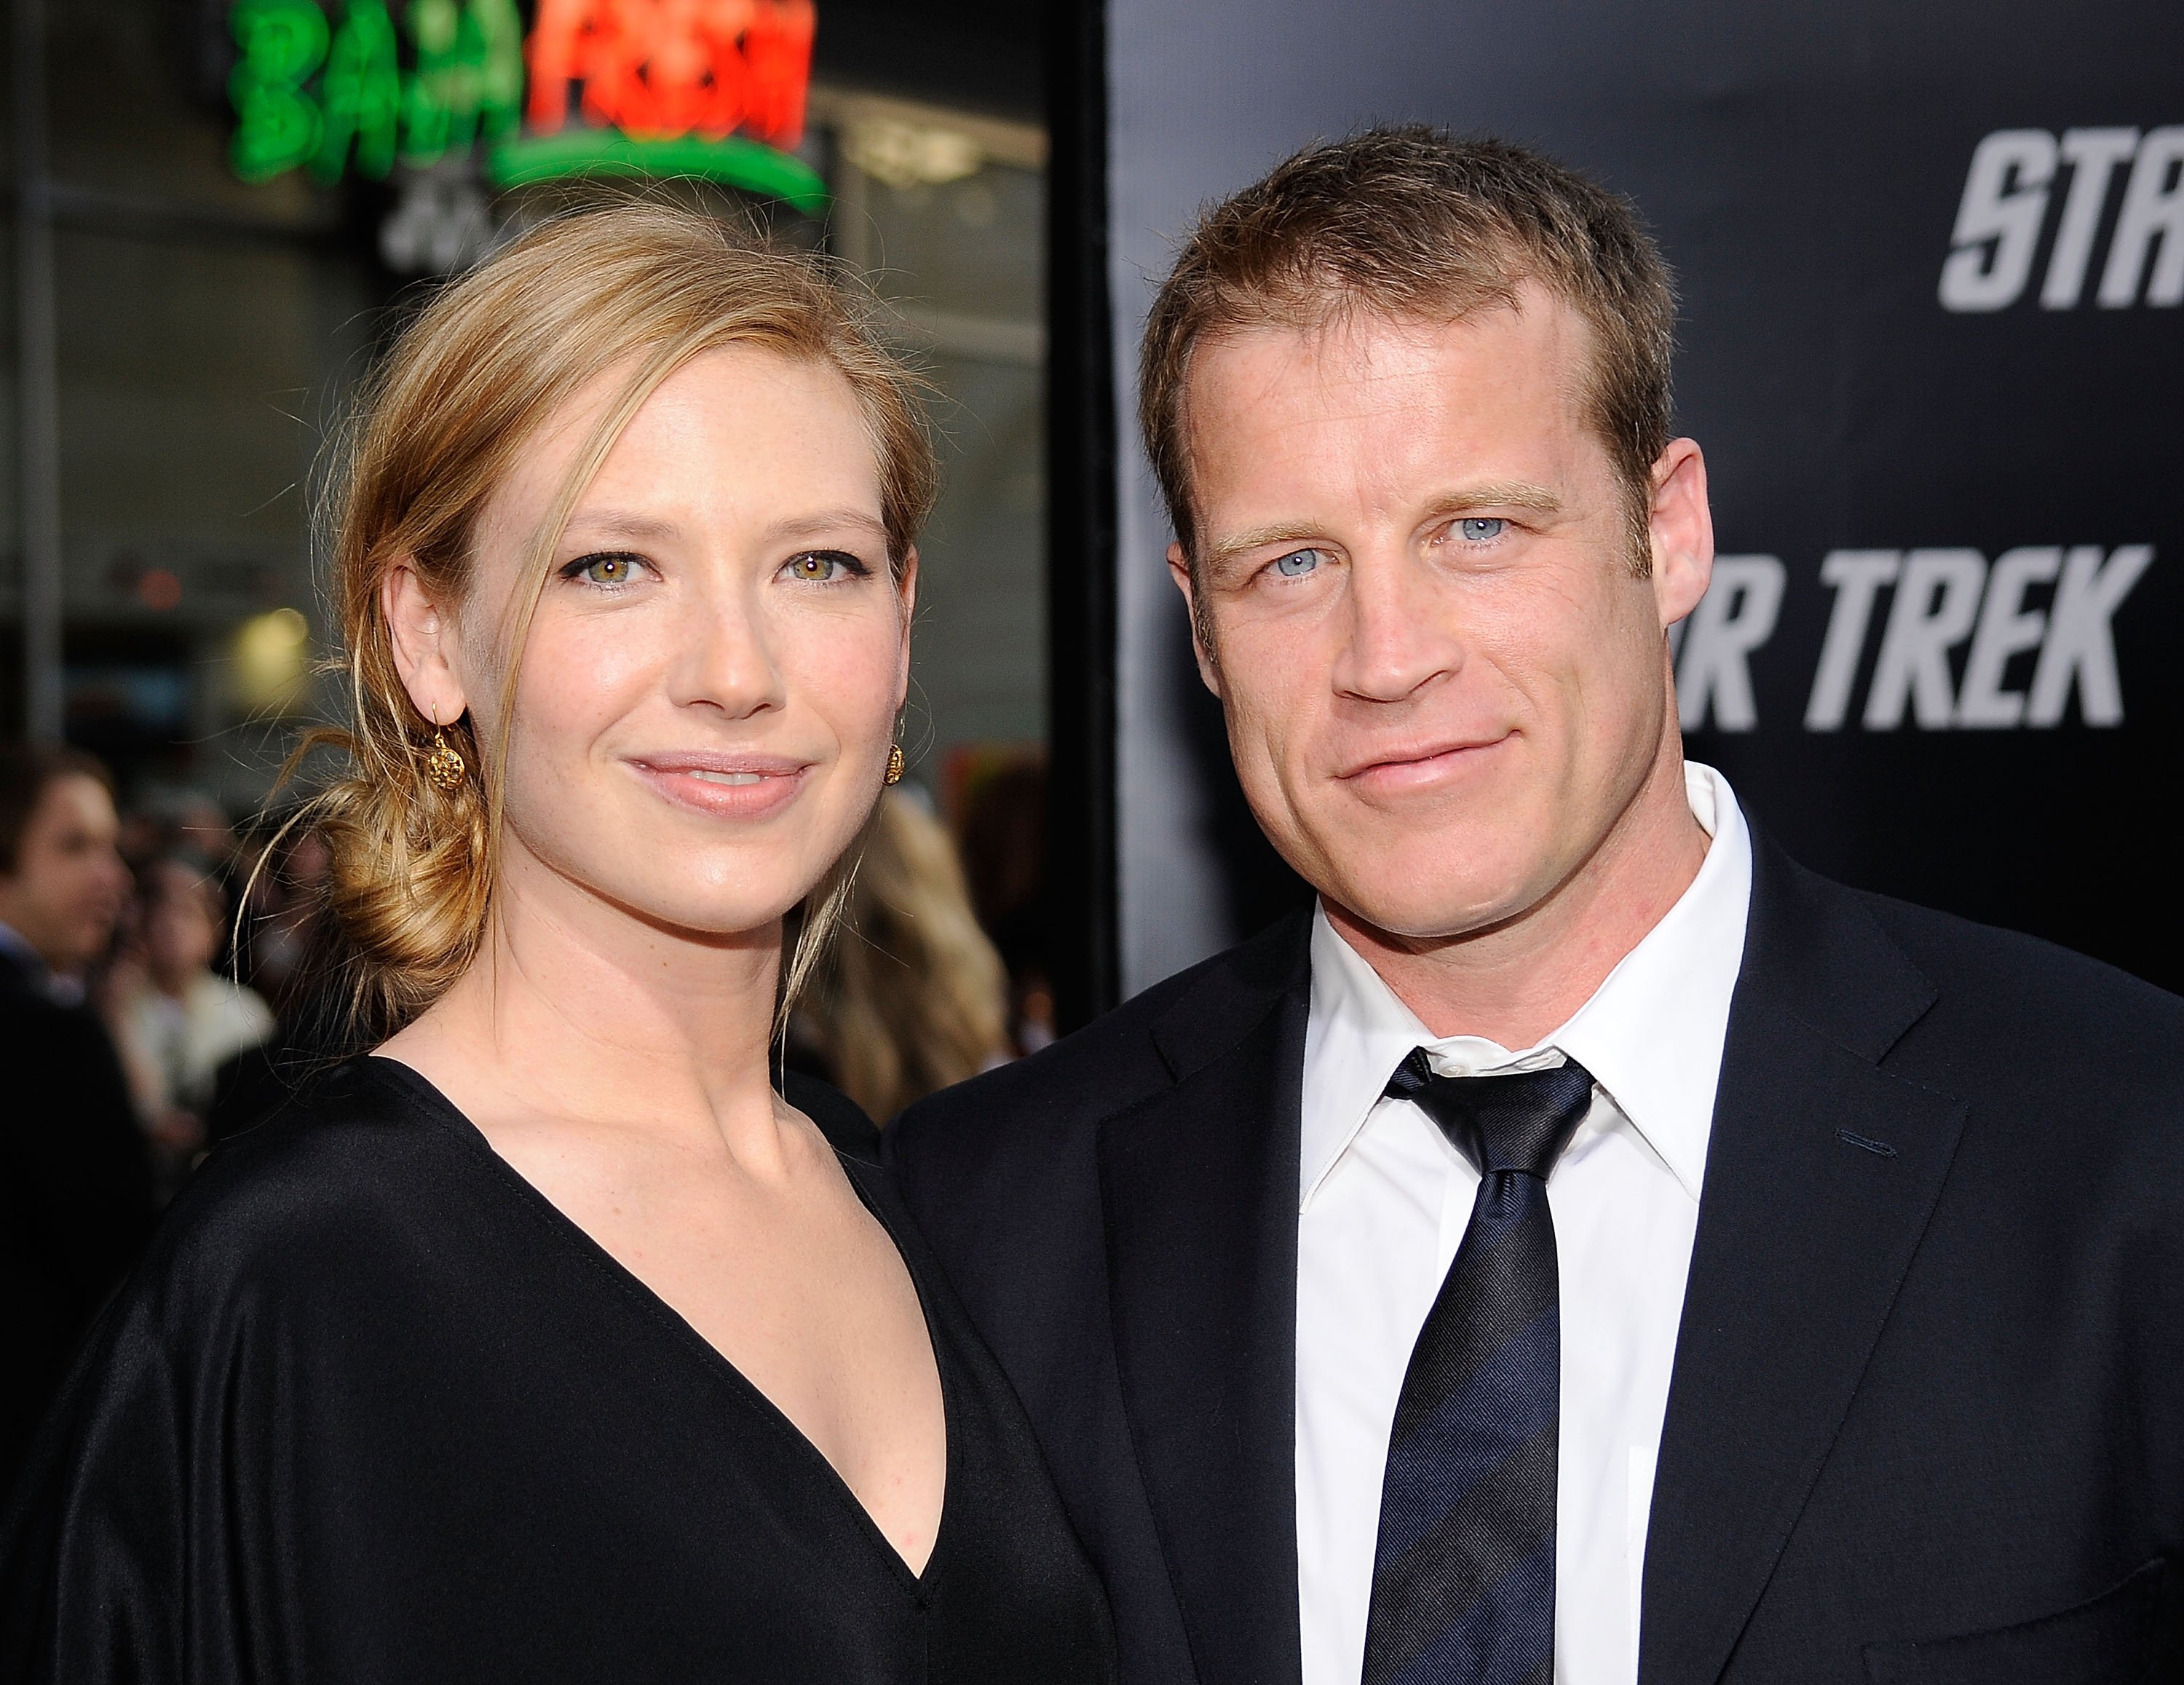 Anna Torv and Mark Valley are pictured as they arrive at the premiere of Paramount's "Star Trek" on April 30, 2009, at Grauman's Chinese Theatre, Hollywood, California. | Source: Getty Images